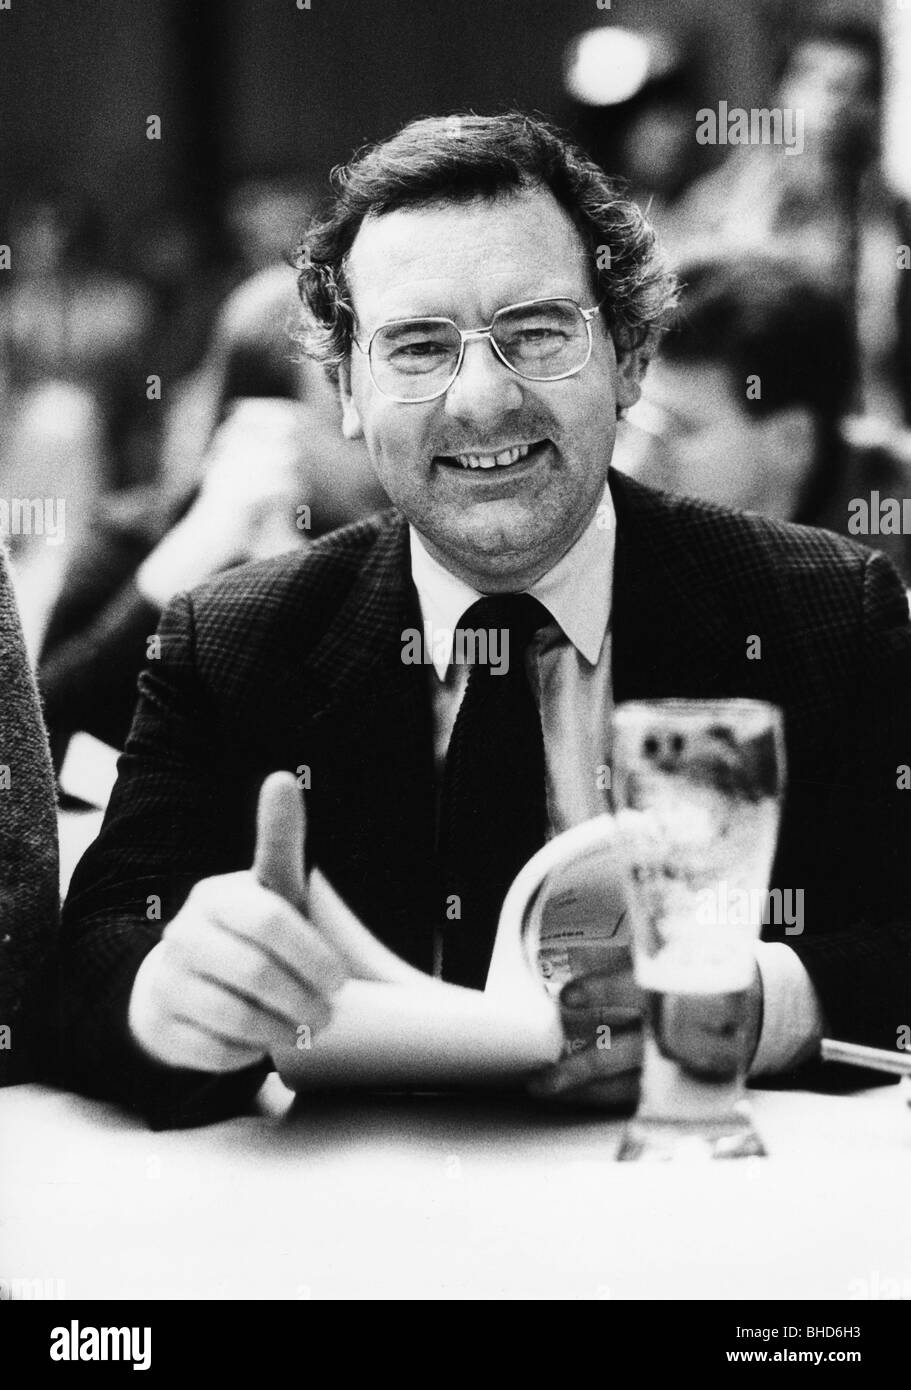 Brunner, Manfred, * 31.7.1947, German politician (FDP), chairman of the Bavarian FDP, portrait, 8th federal congress of the 'Young Liberals' (Junge Liberale), Freiburg, Germany 6.- 8.12.1985, Stock Photo